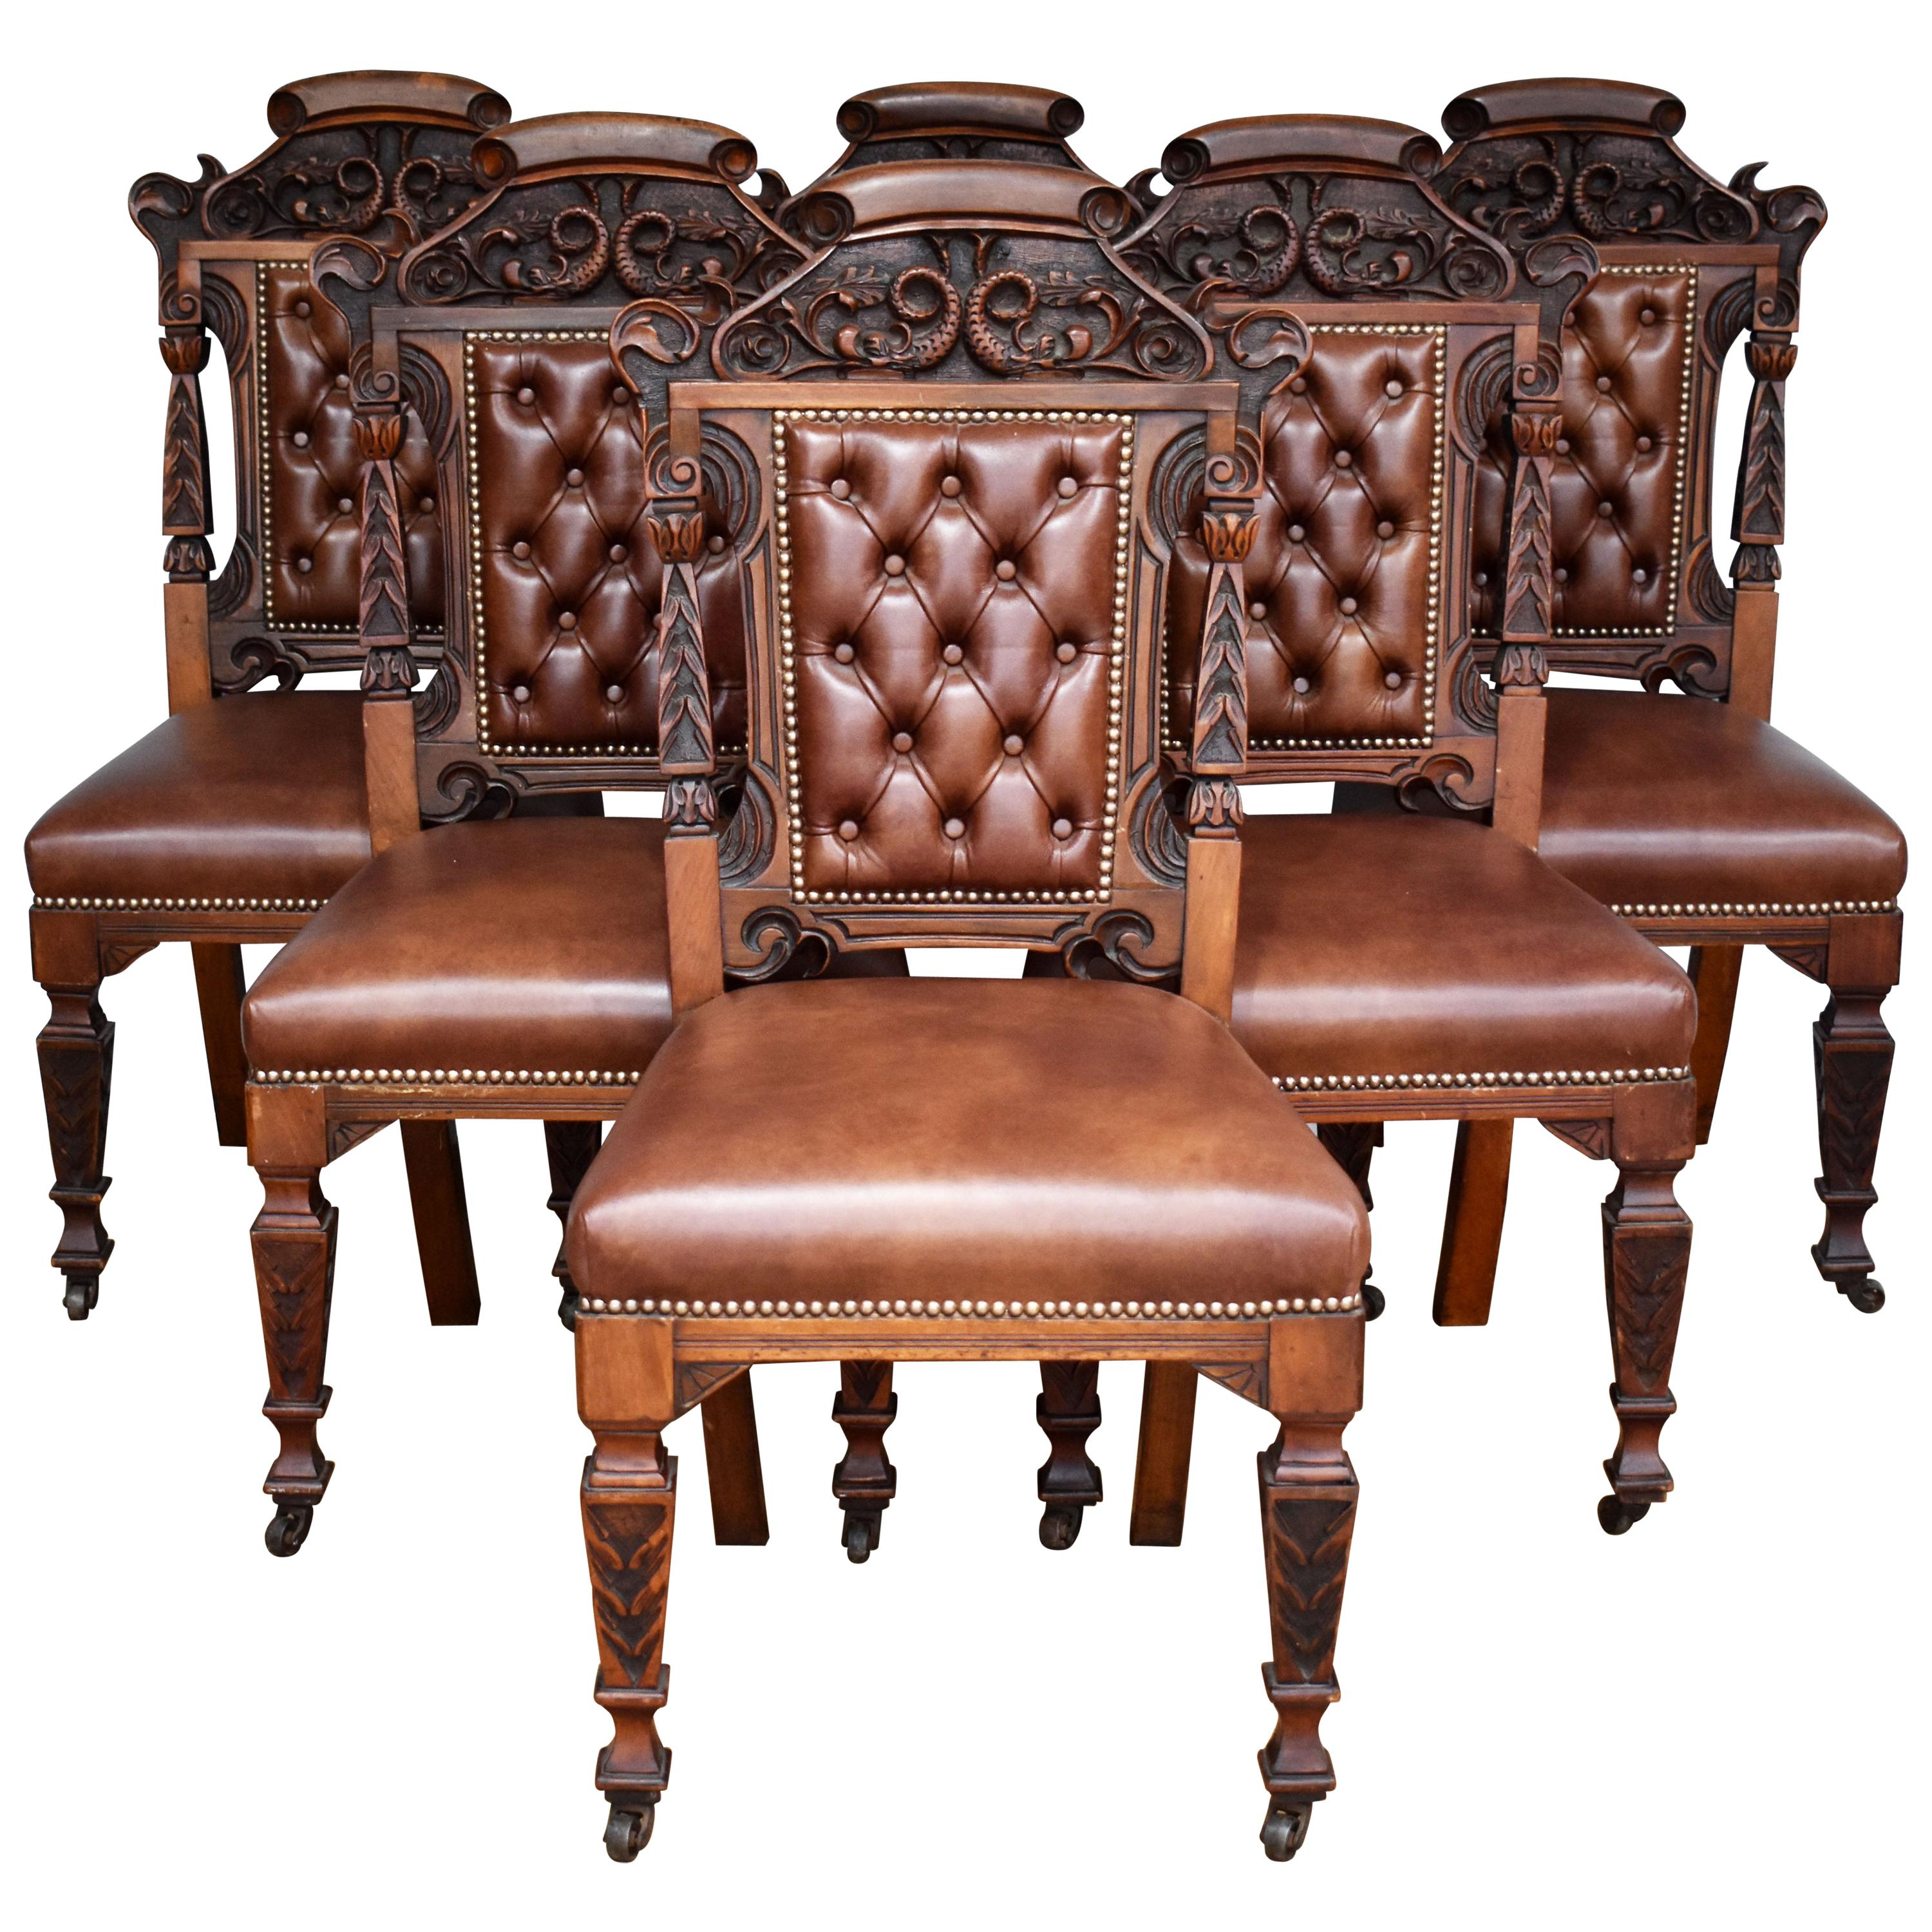 Set of 6 19th Century Carved Walnut Dining Chairs